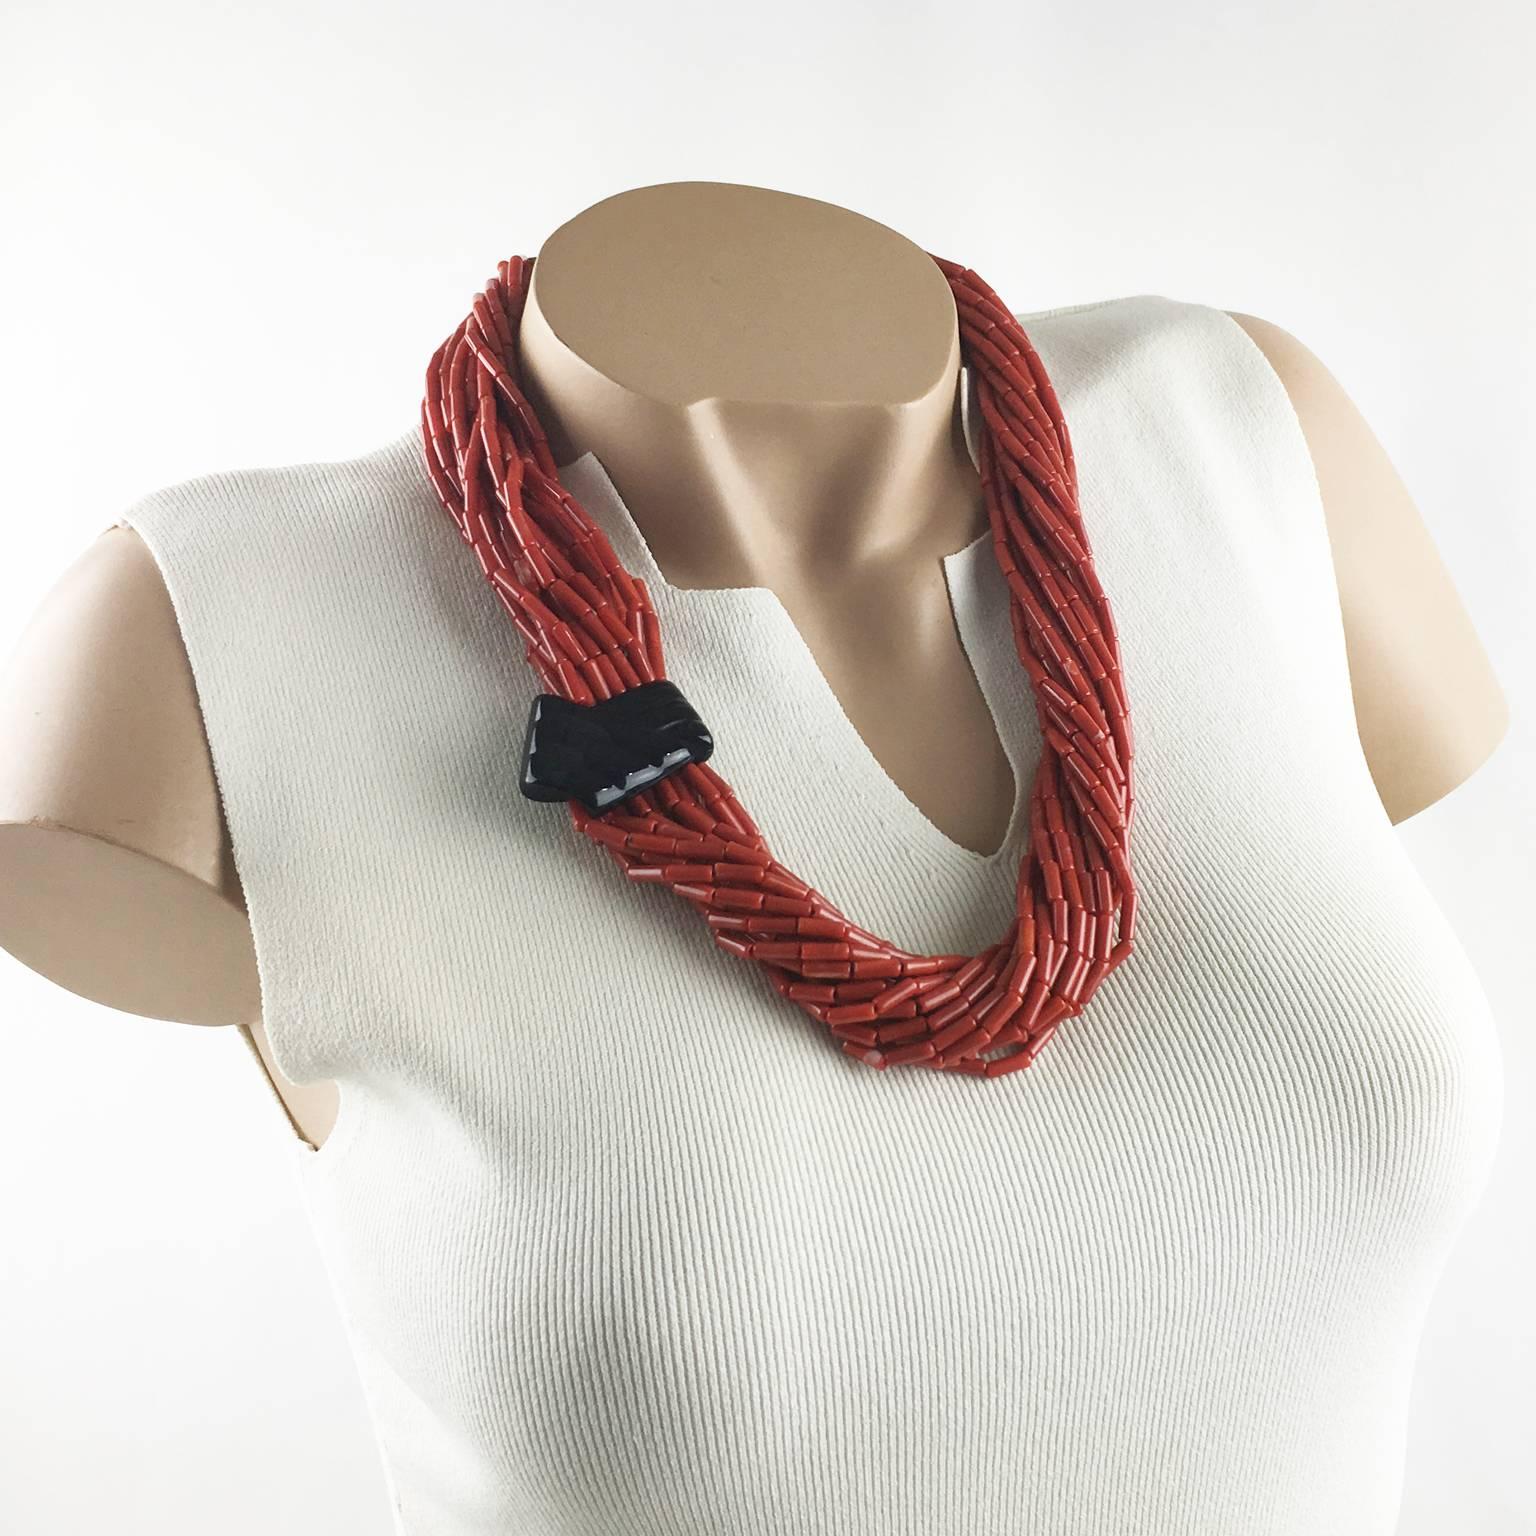 Lovely Angela Caputi, made in Italy resin choker beaded necklace. Oversized multi-strand design with tiny faux coral resin beads, compliment with a large black carved resin medallion. Her matching of colors is always extremely classy, perfect for